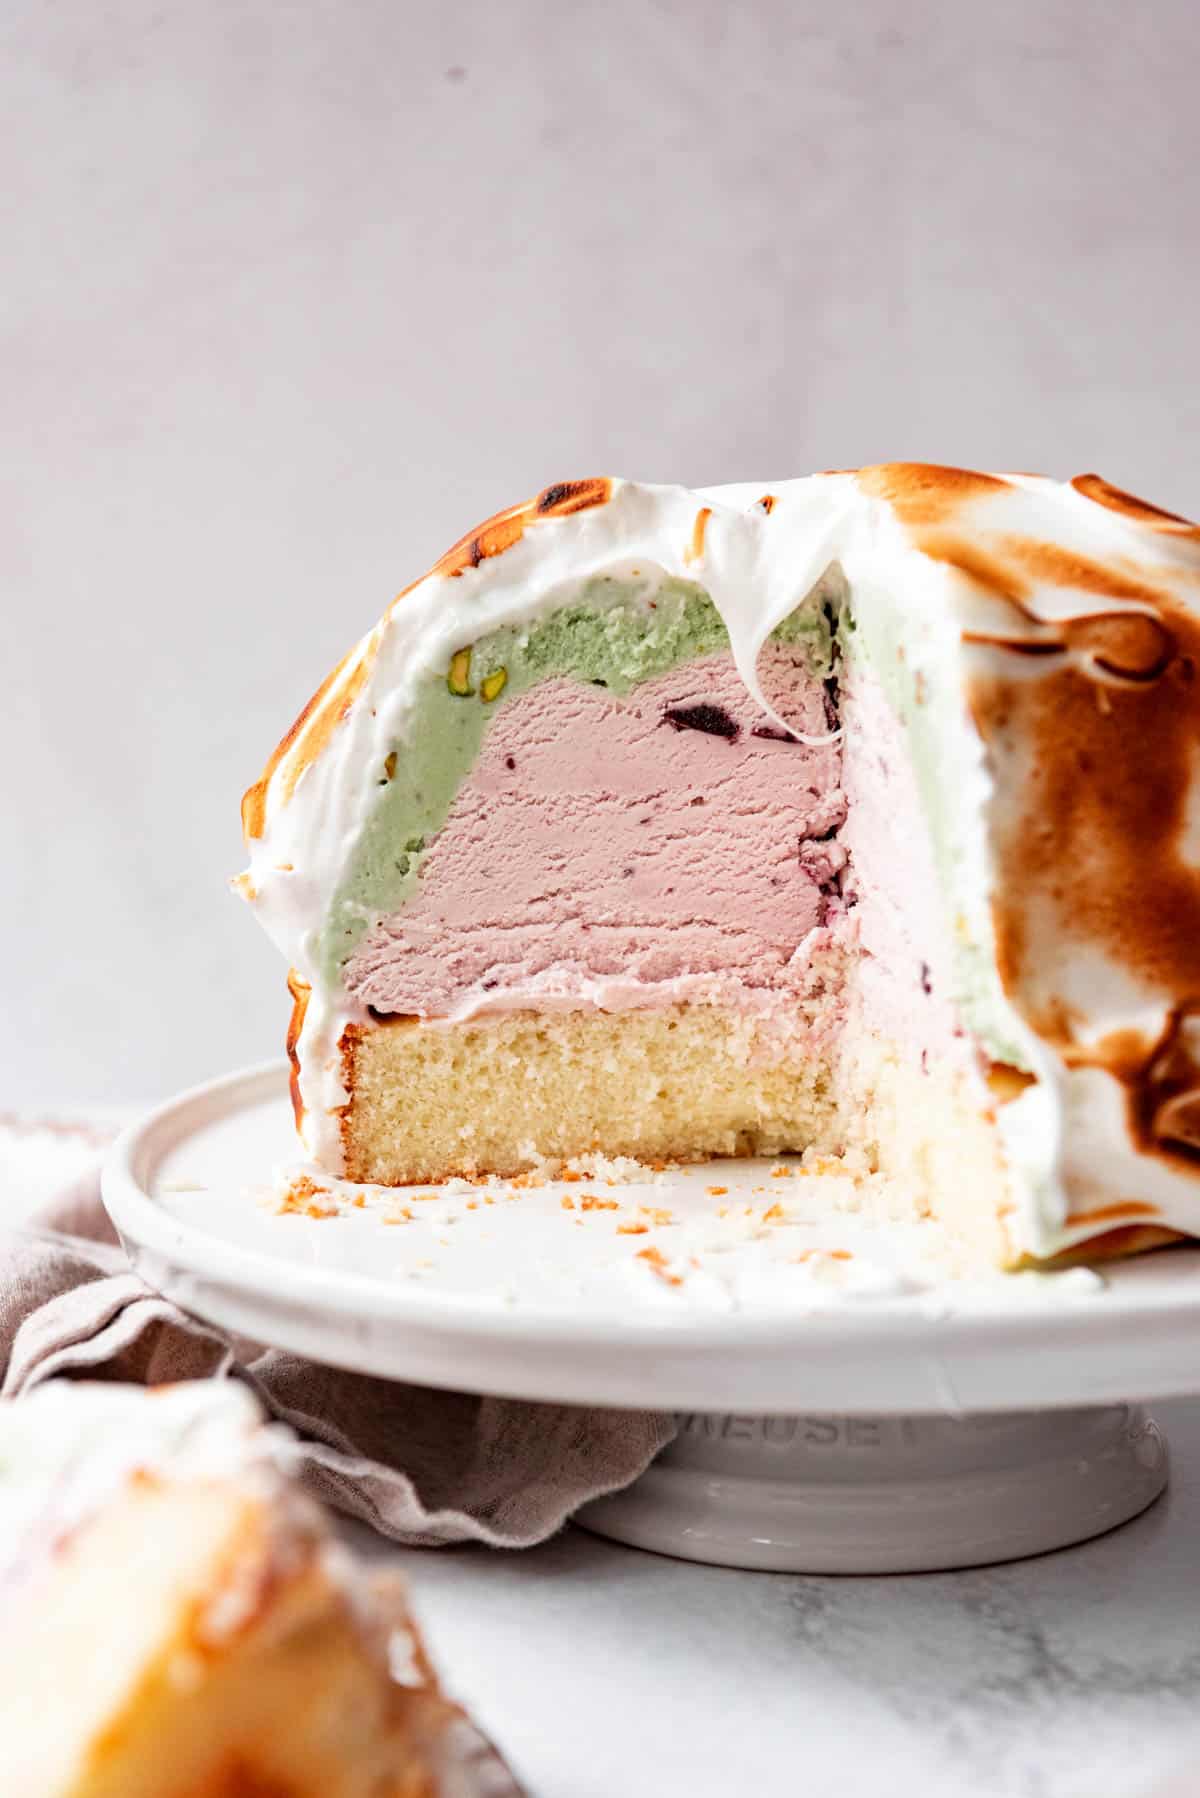 A baked Alaska on a white cake stand with pistachio and cherry flavors.